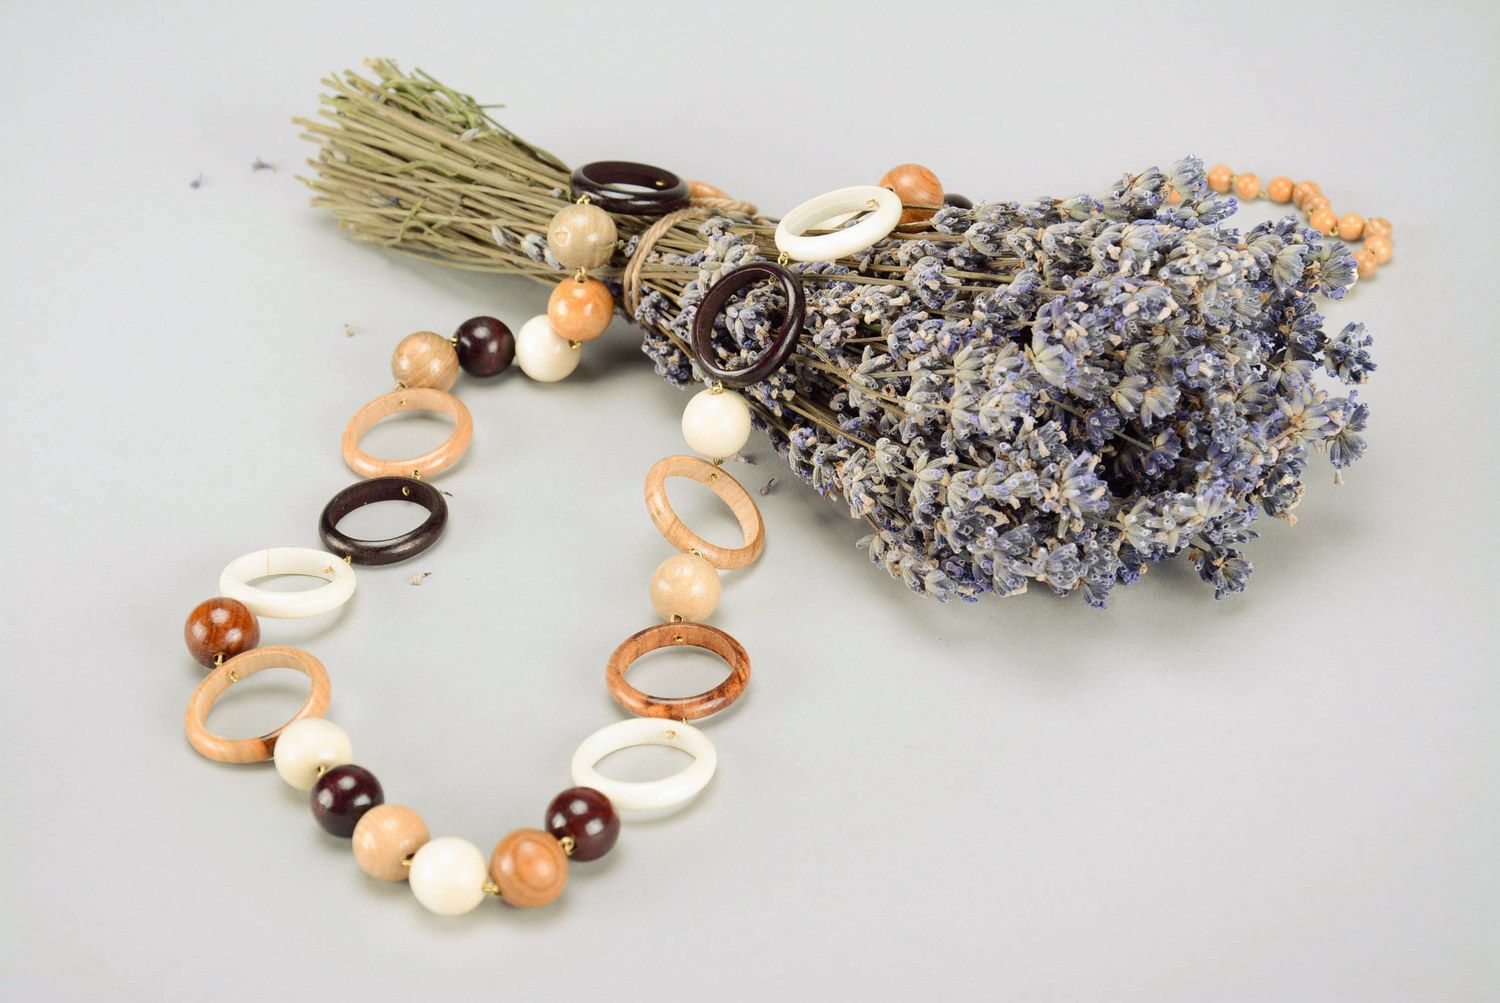 Wooden bead necklace photo 1